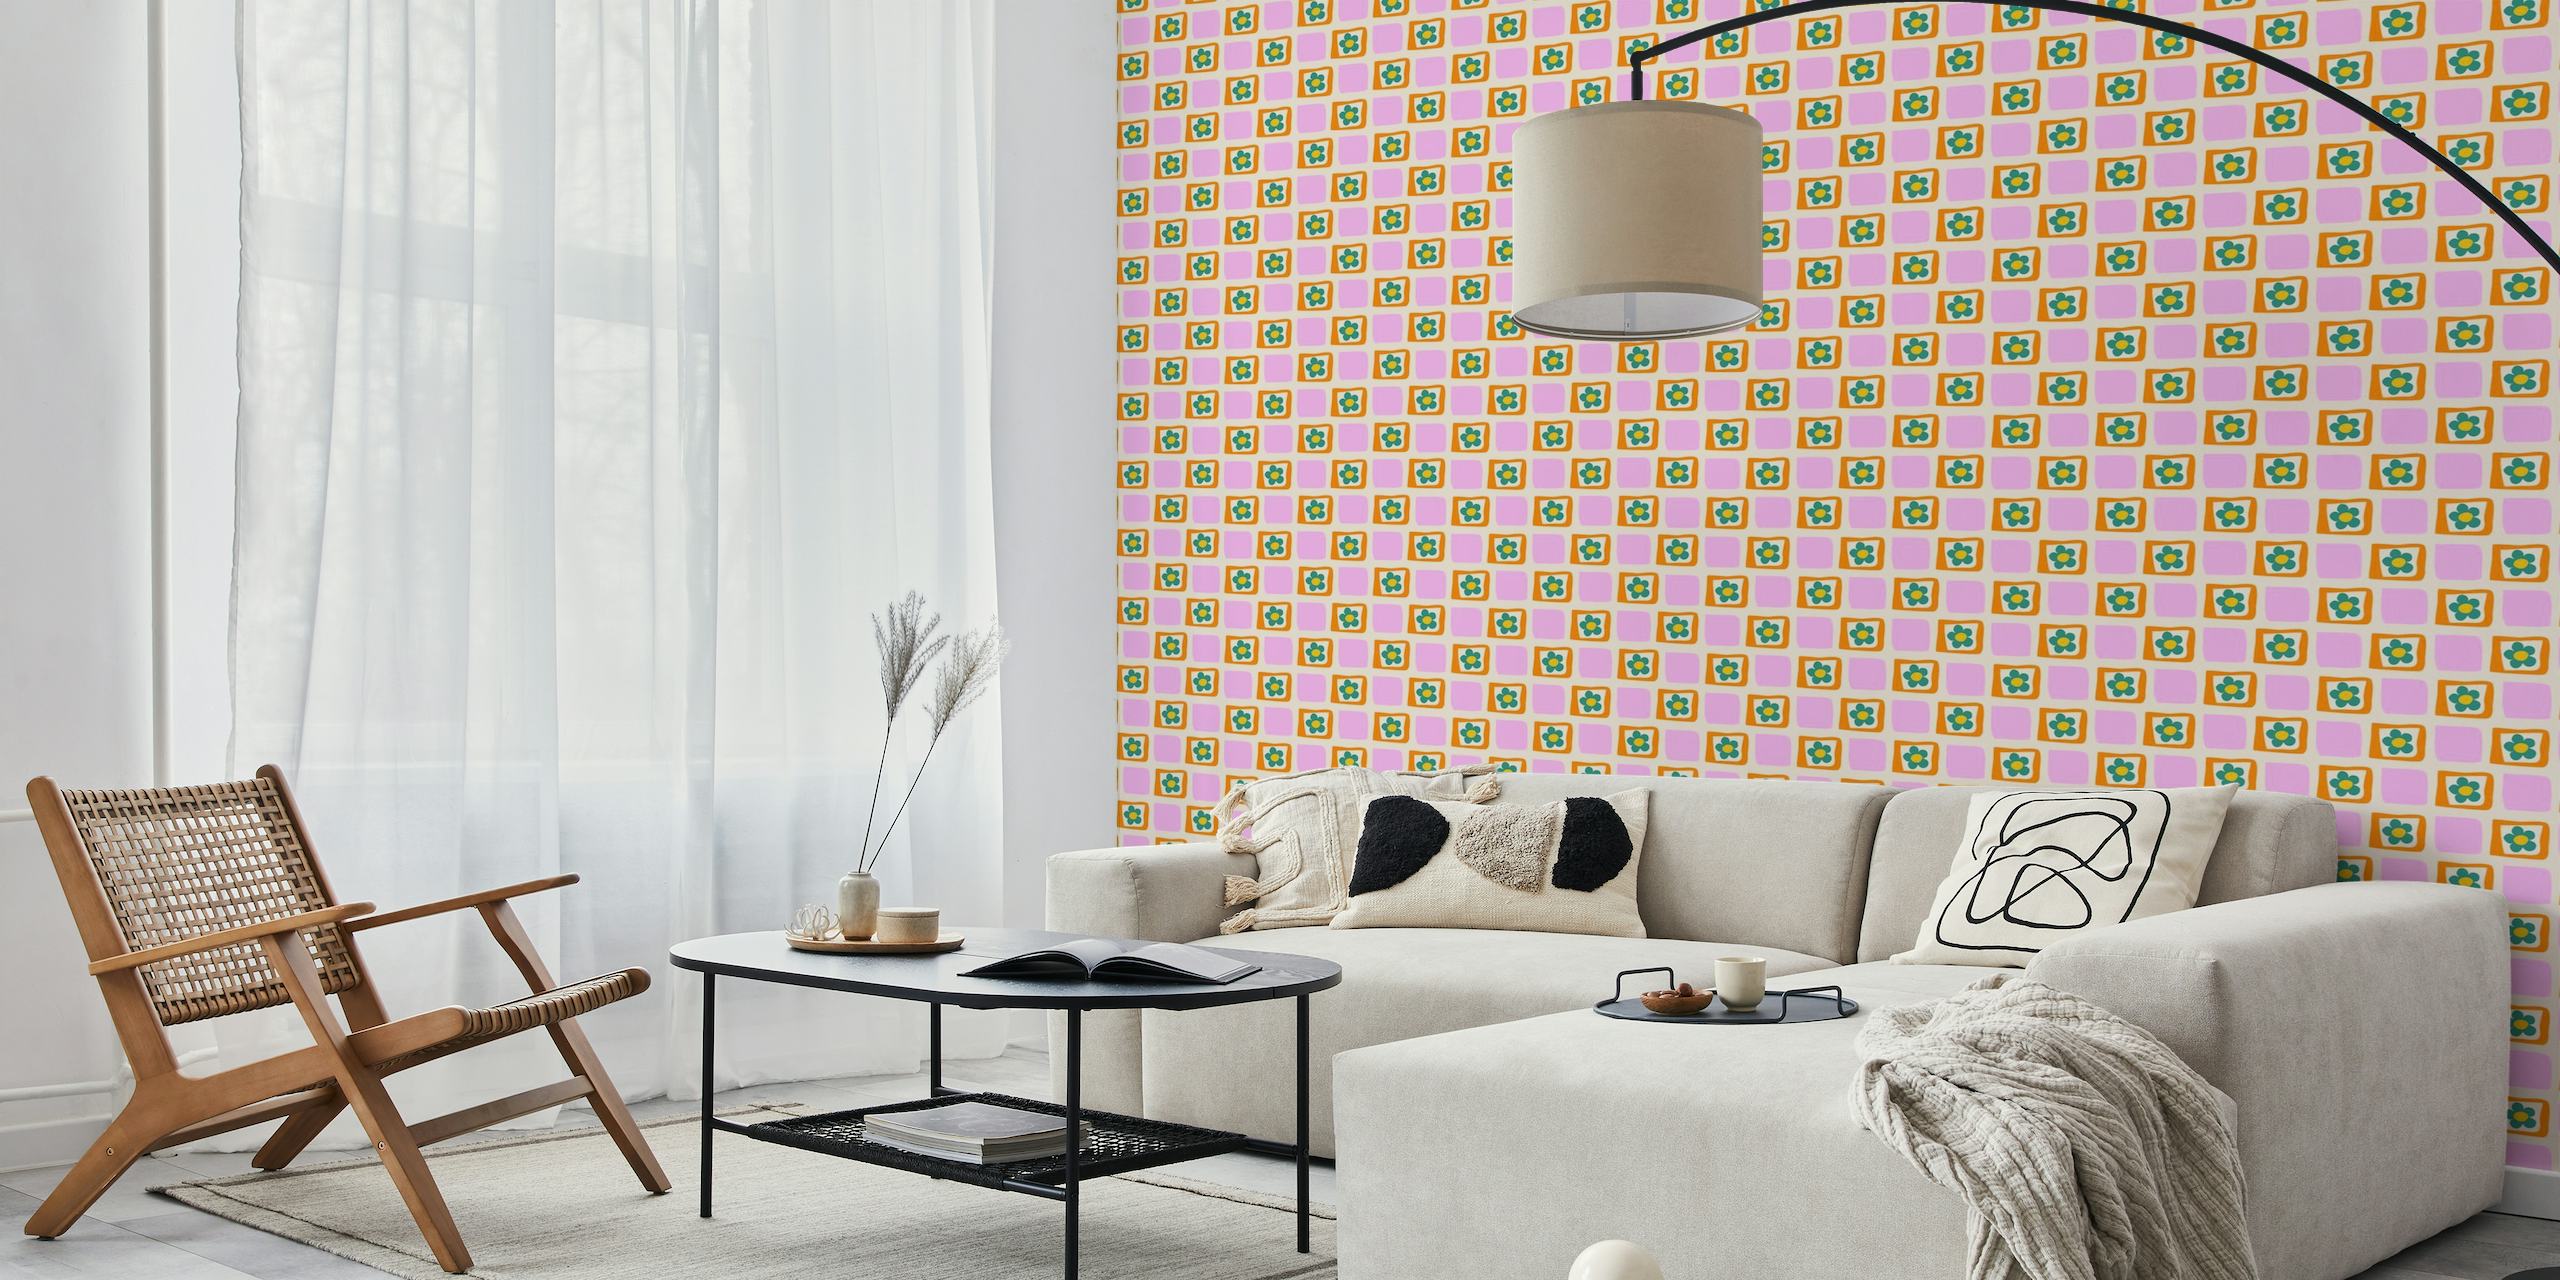 Retro floral pattern wall mural with pink and orange checkered blooms design